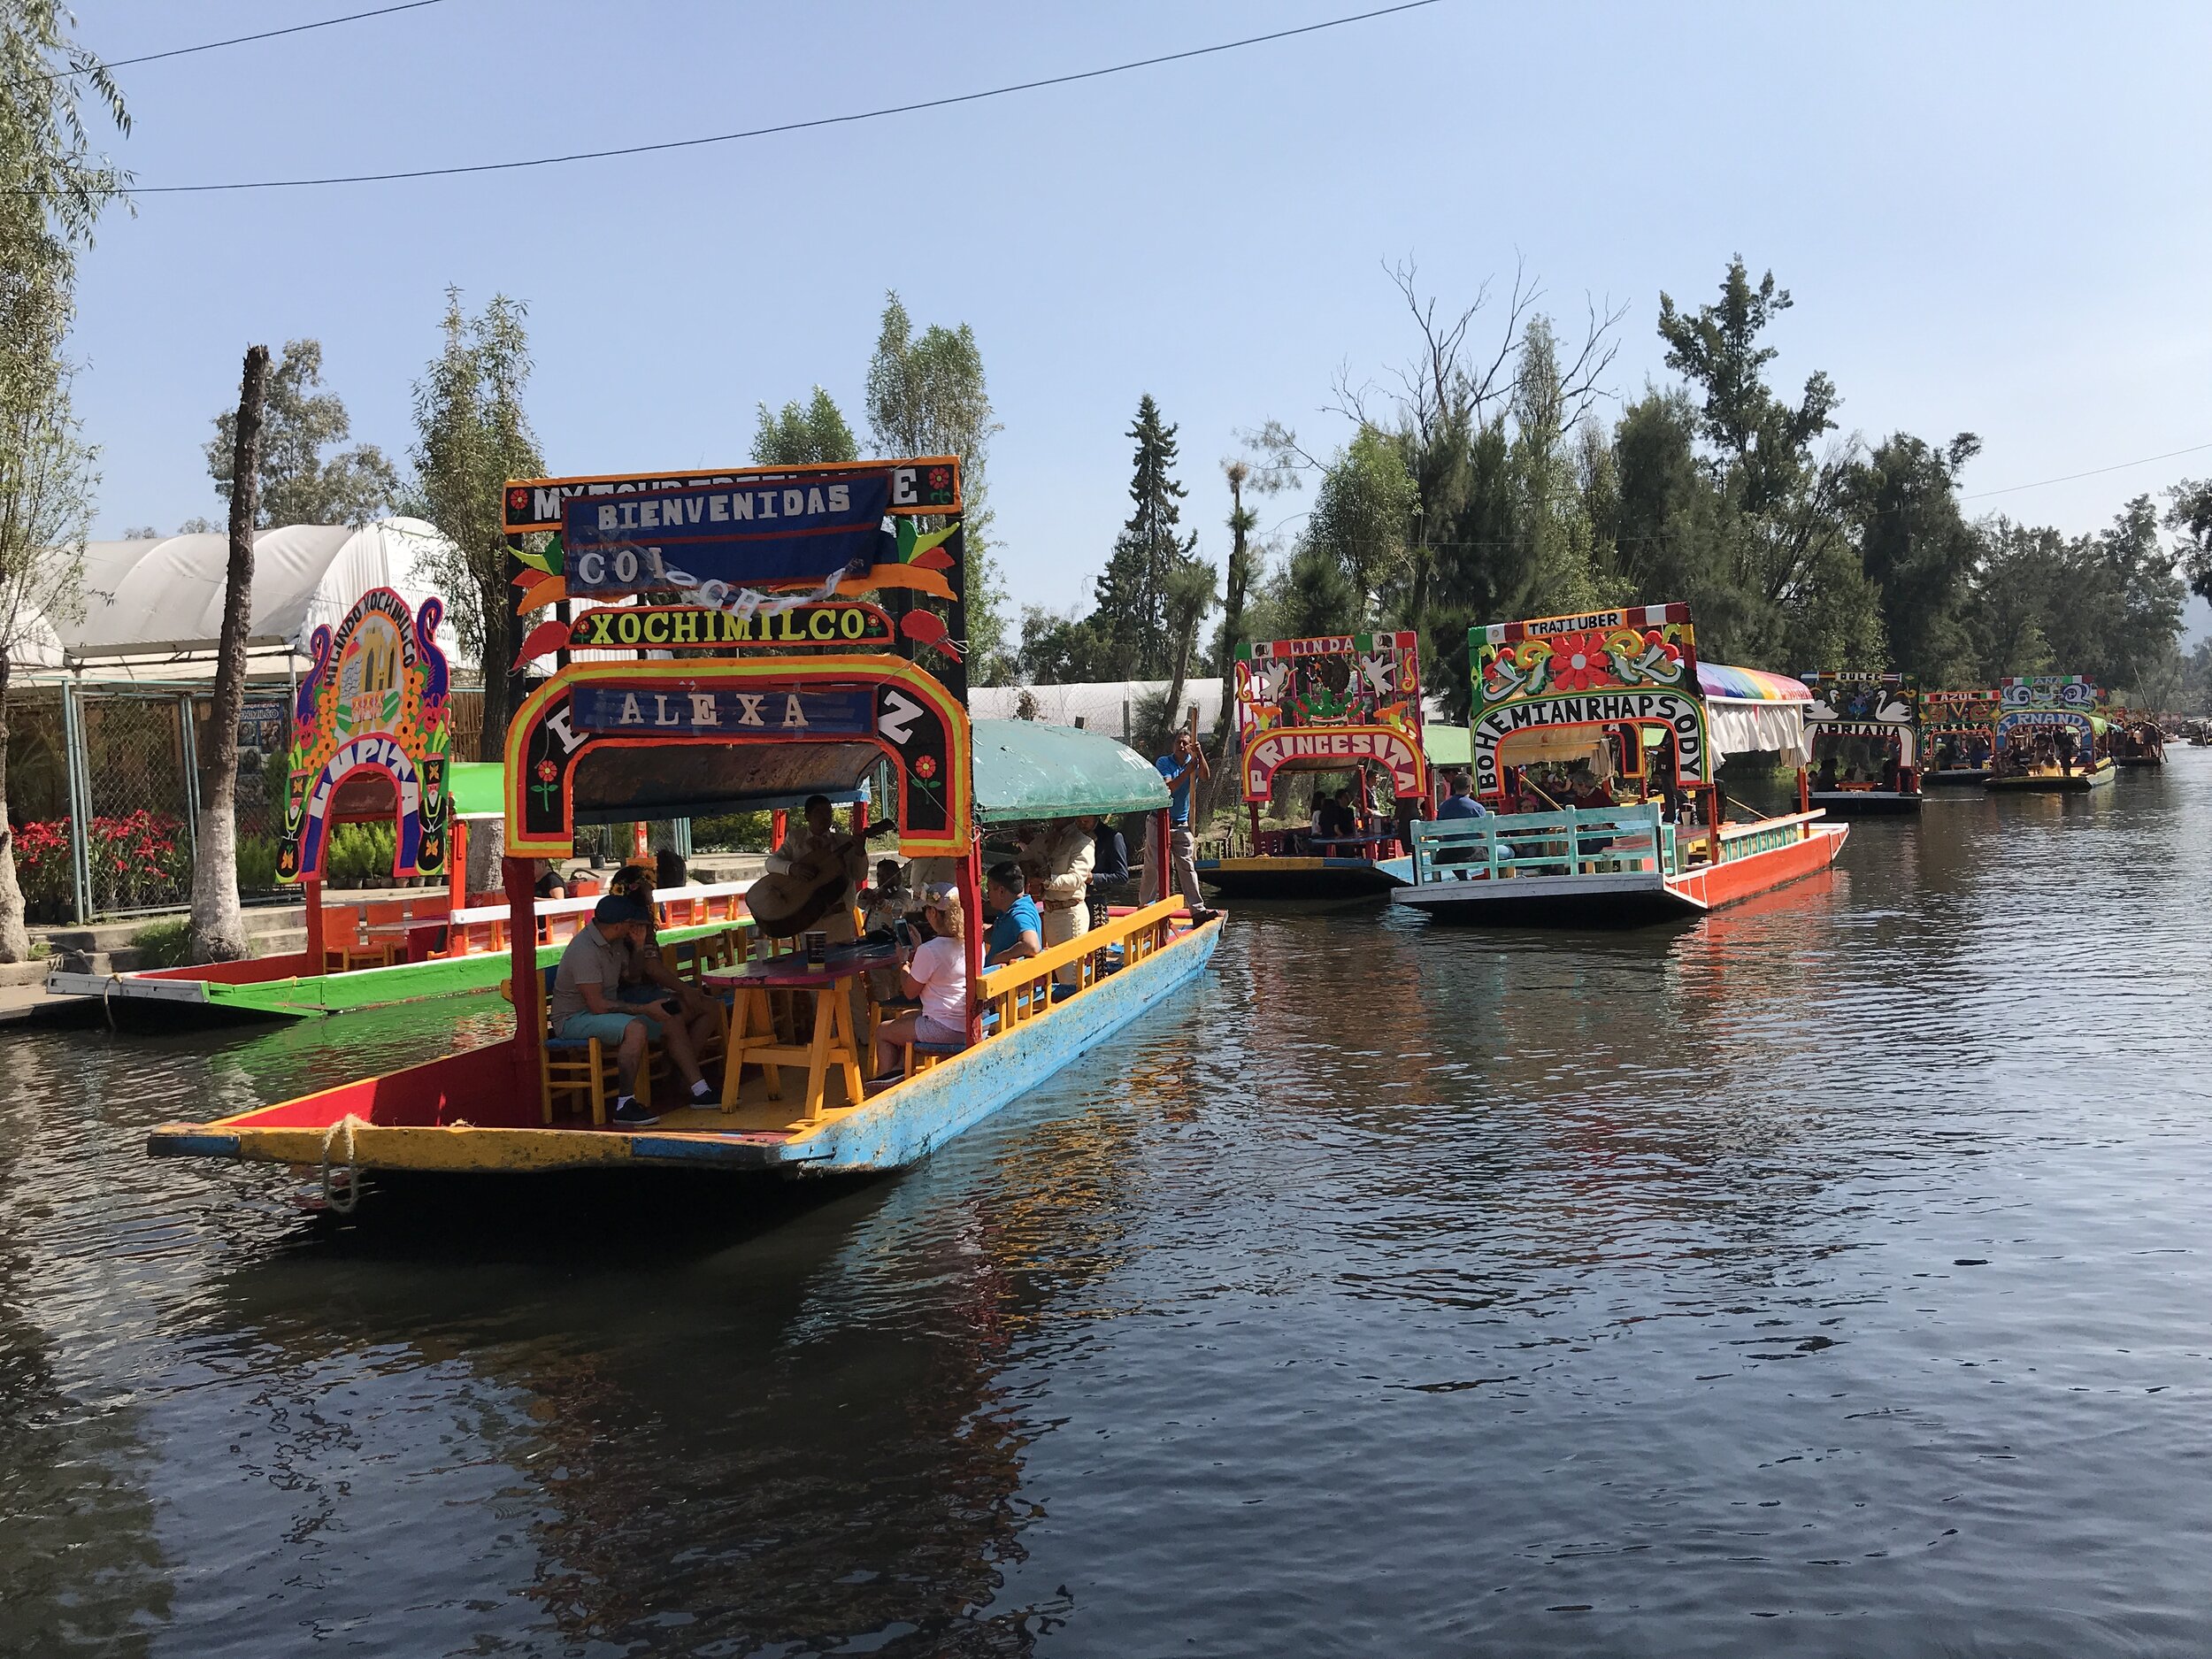 Xochimilco is nicknamed the Venice of Mexico City — though the boats are much more whimsical than Italian gondolas.